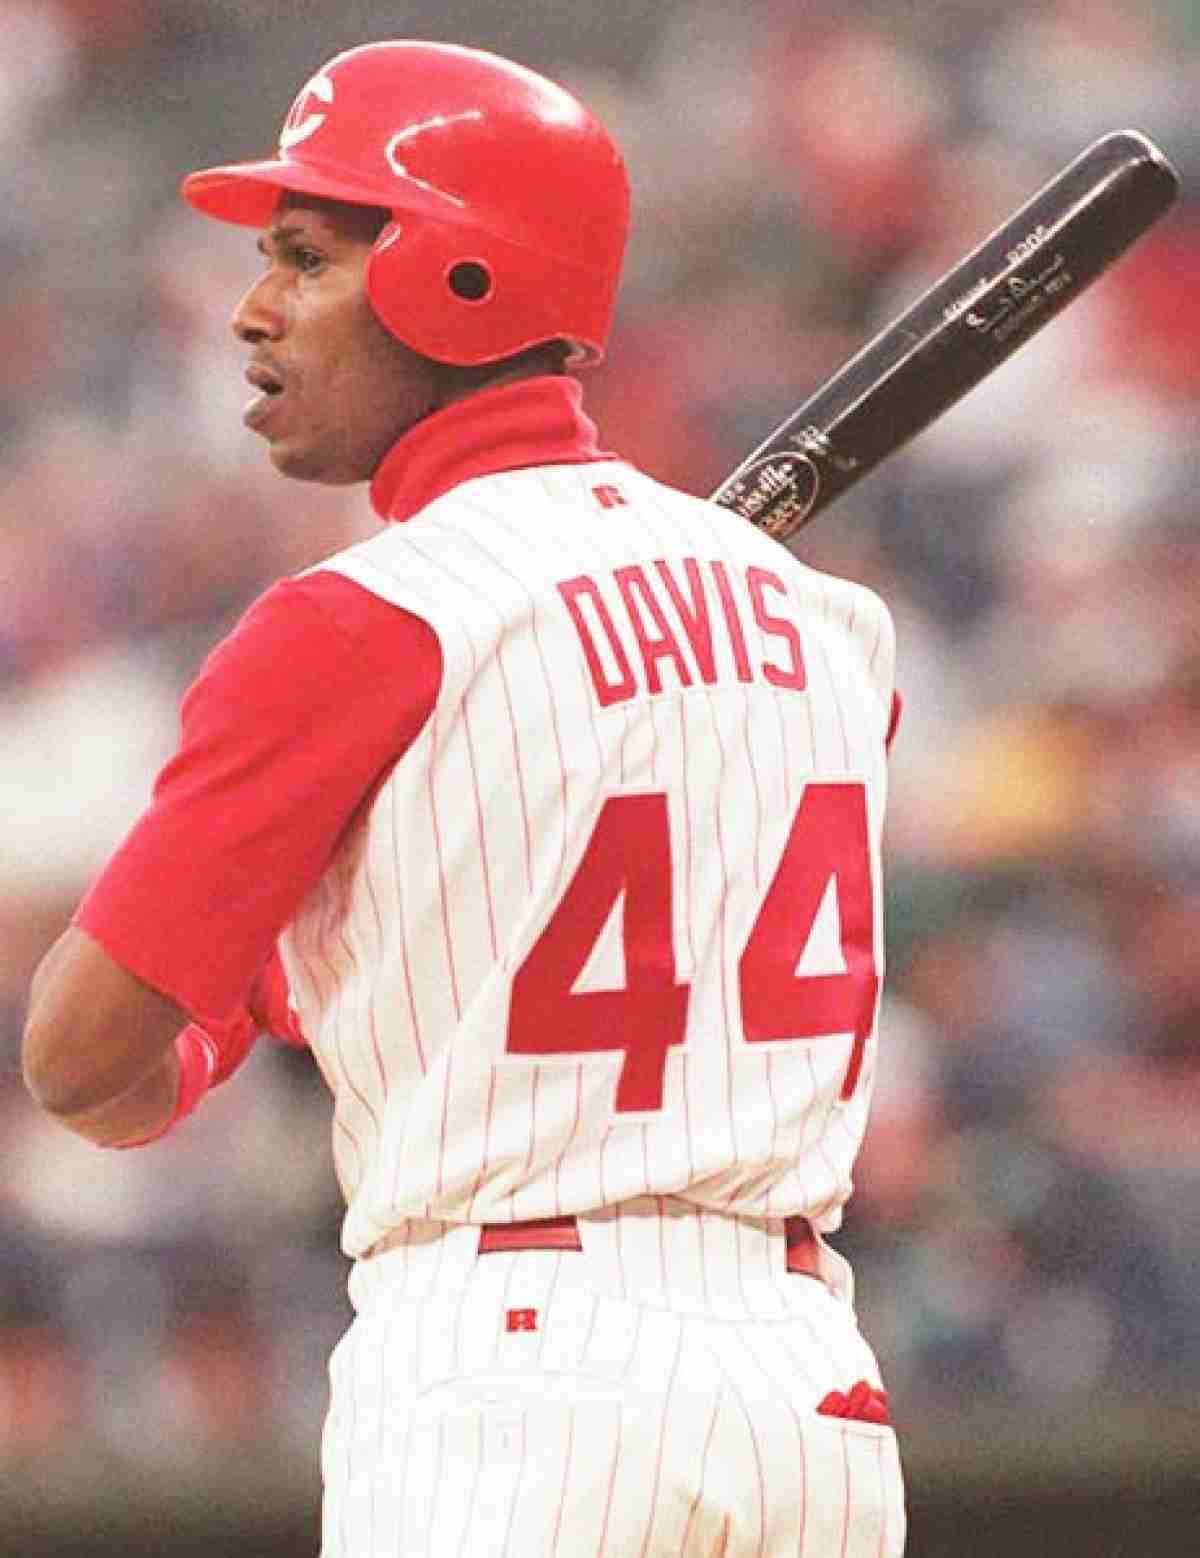 Eric Davis put up video-game stats for Reds